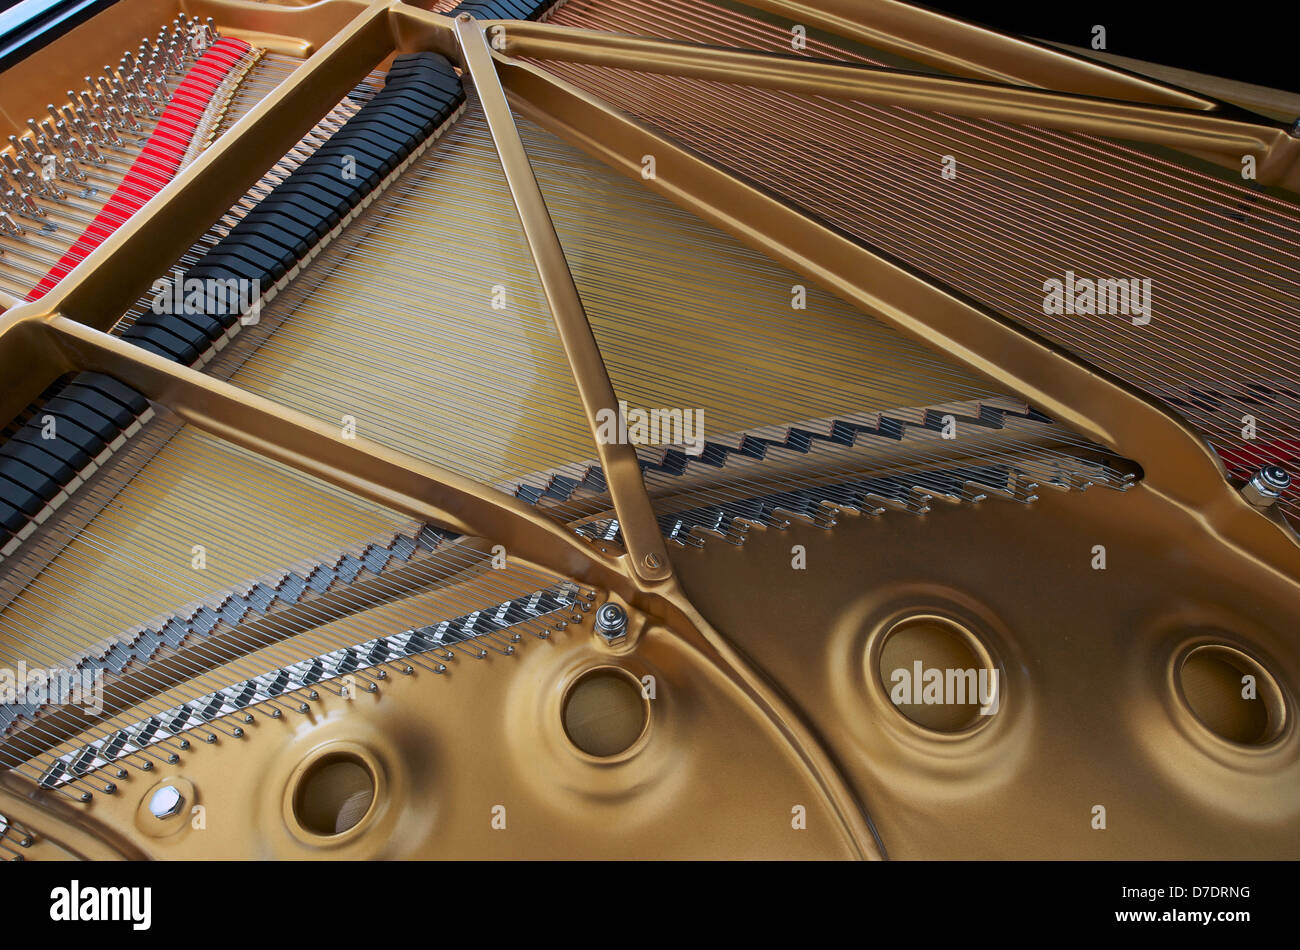 Soundboard, Strings and Harp of a Grand Piano. Stock Photo